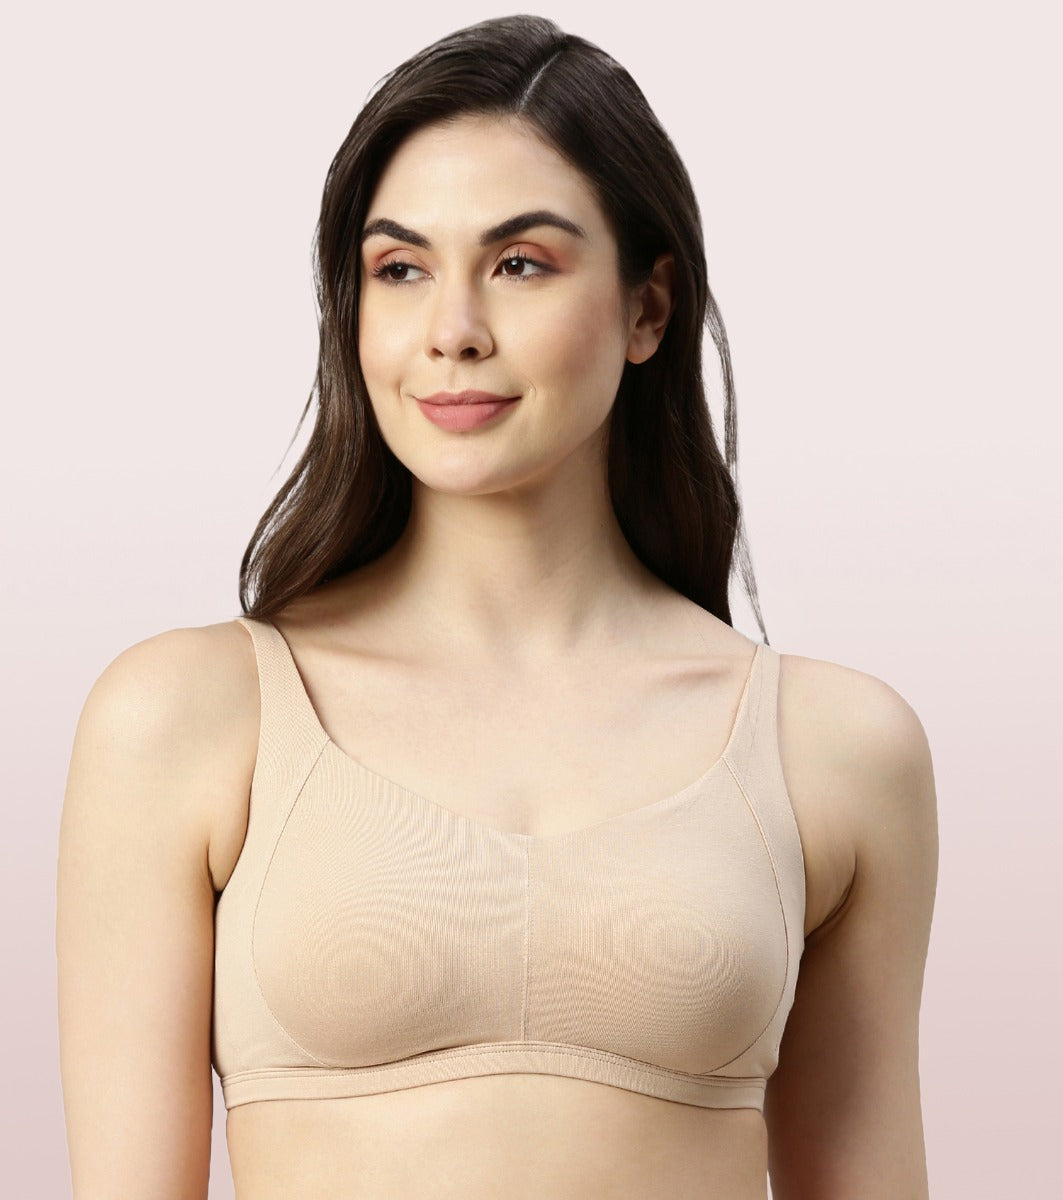 Enamor Intellifresh A058 Eco-antimicrobial Cotton Minimizer Bra for Women- Full Coverage, Padded and Wirefree - Pale Skin